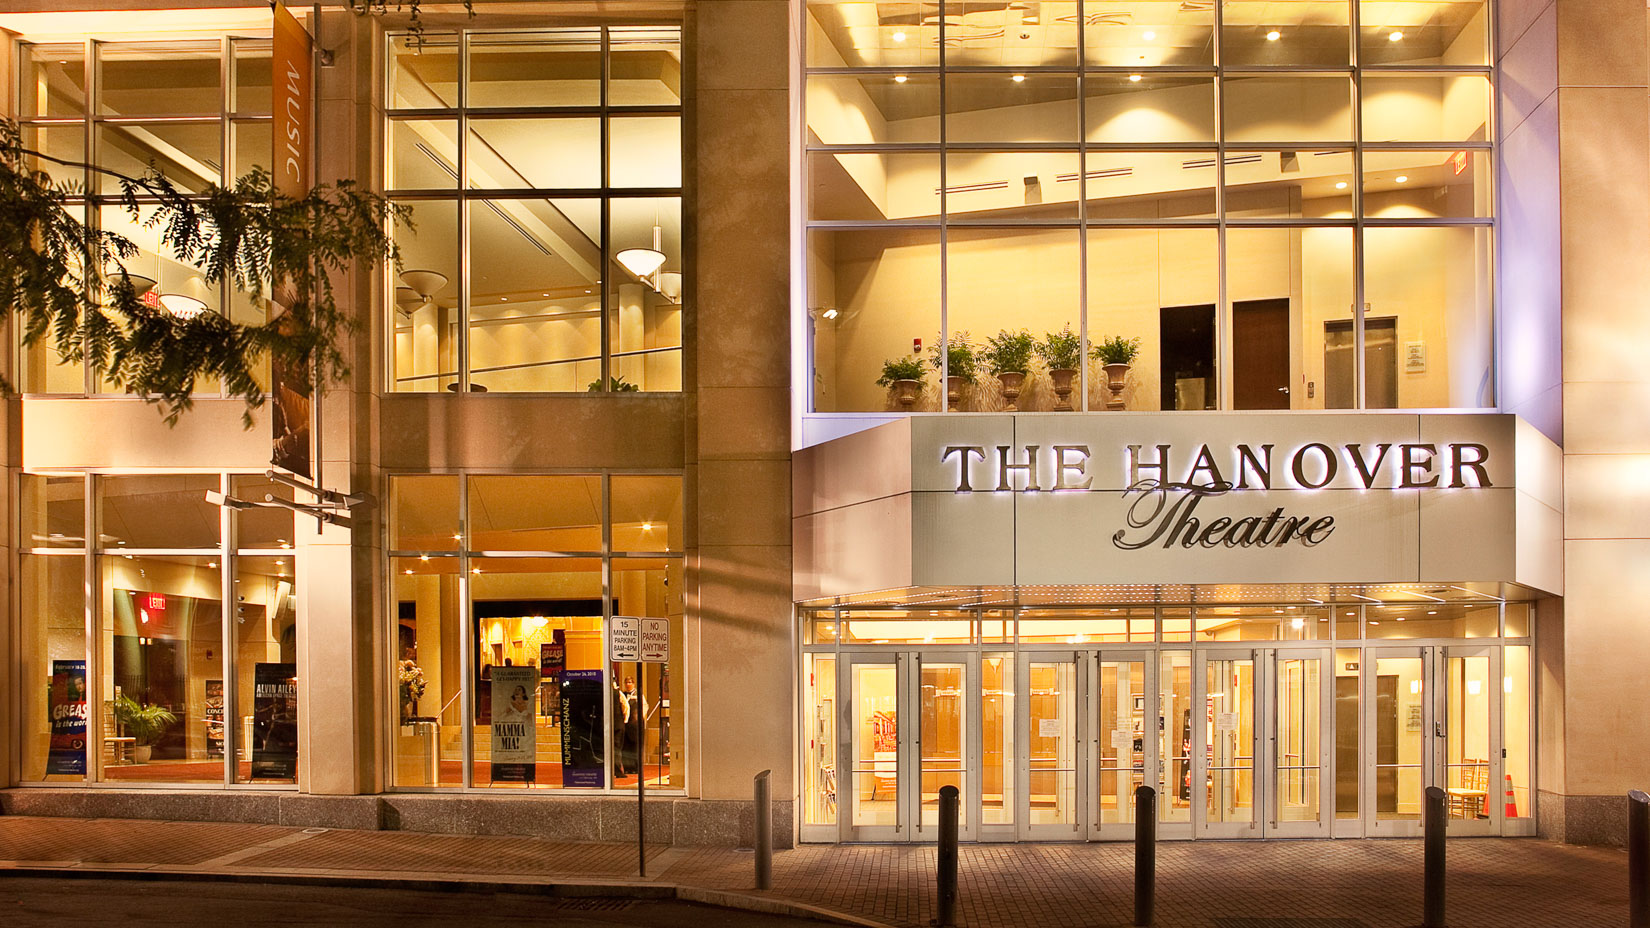 exterior entrance to the hanover theatre.